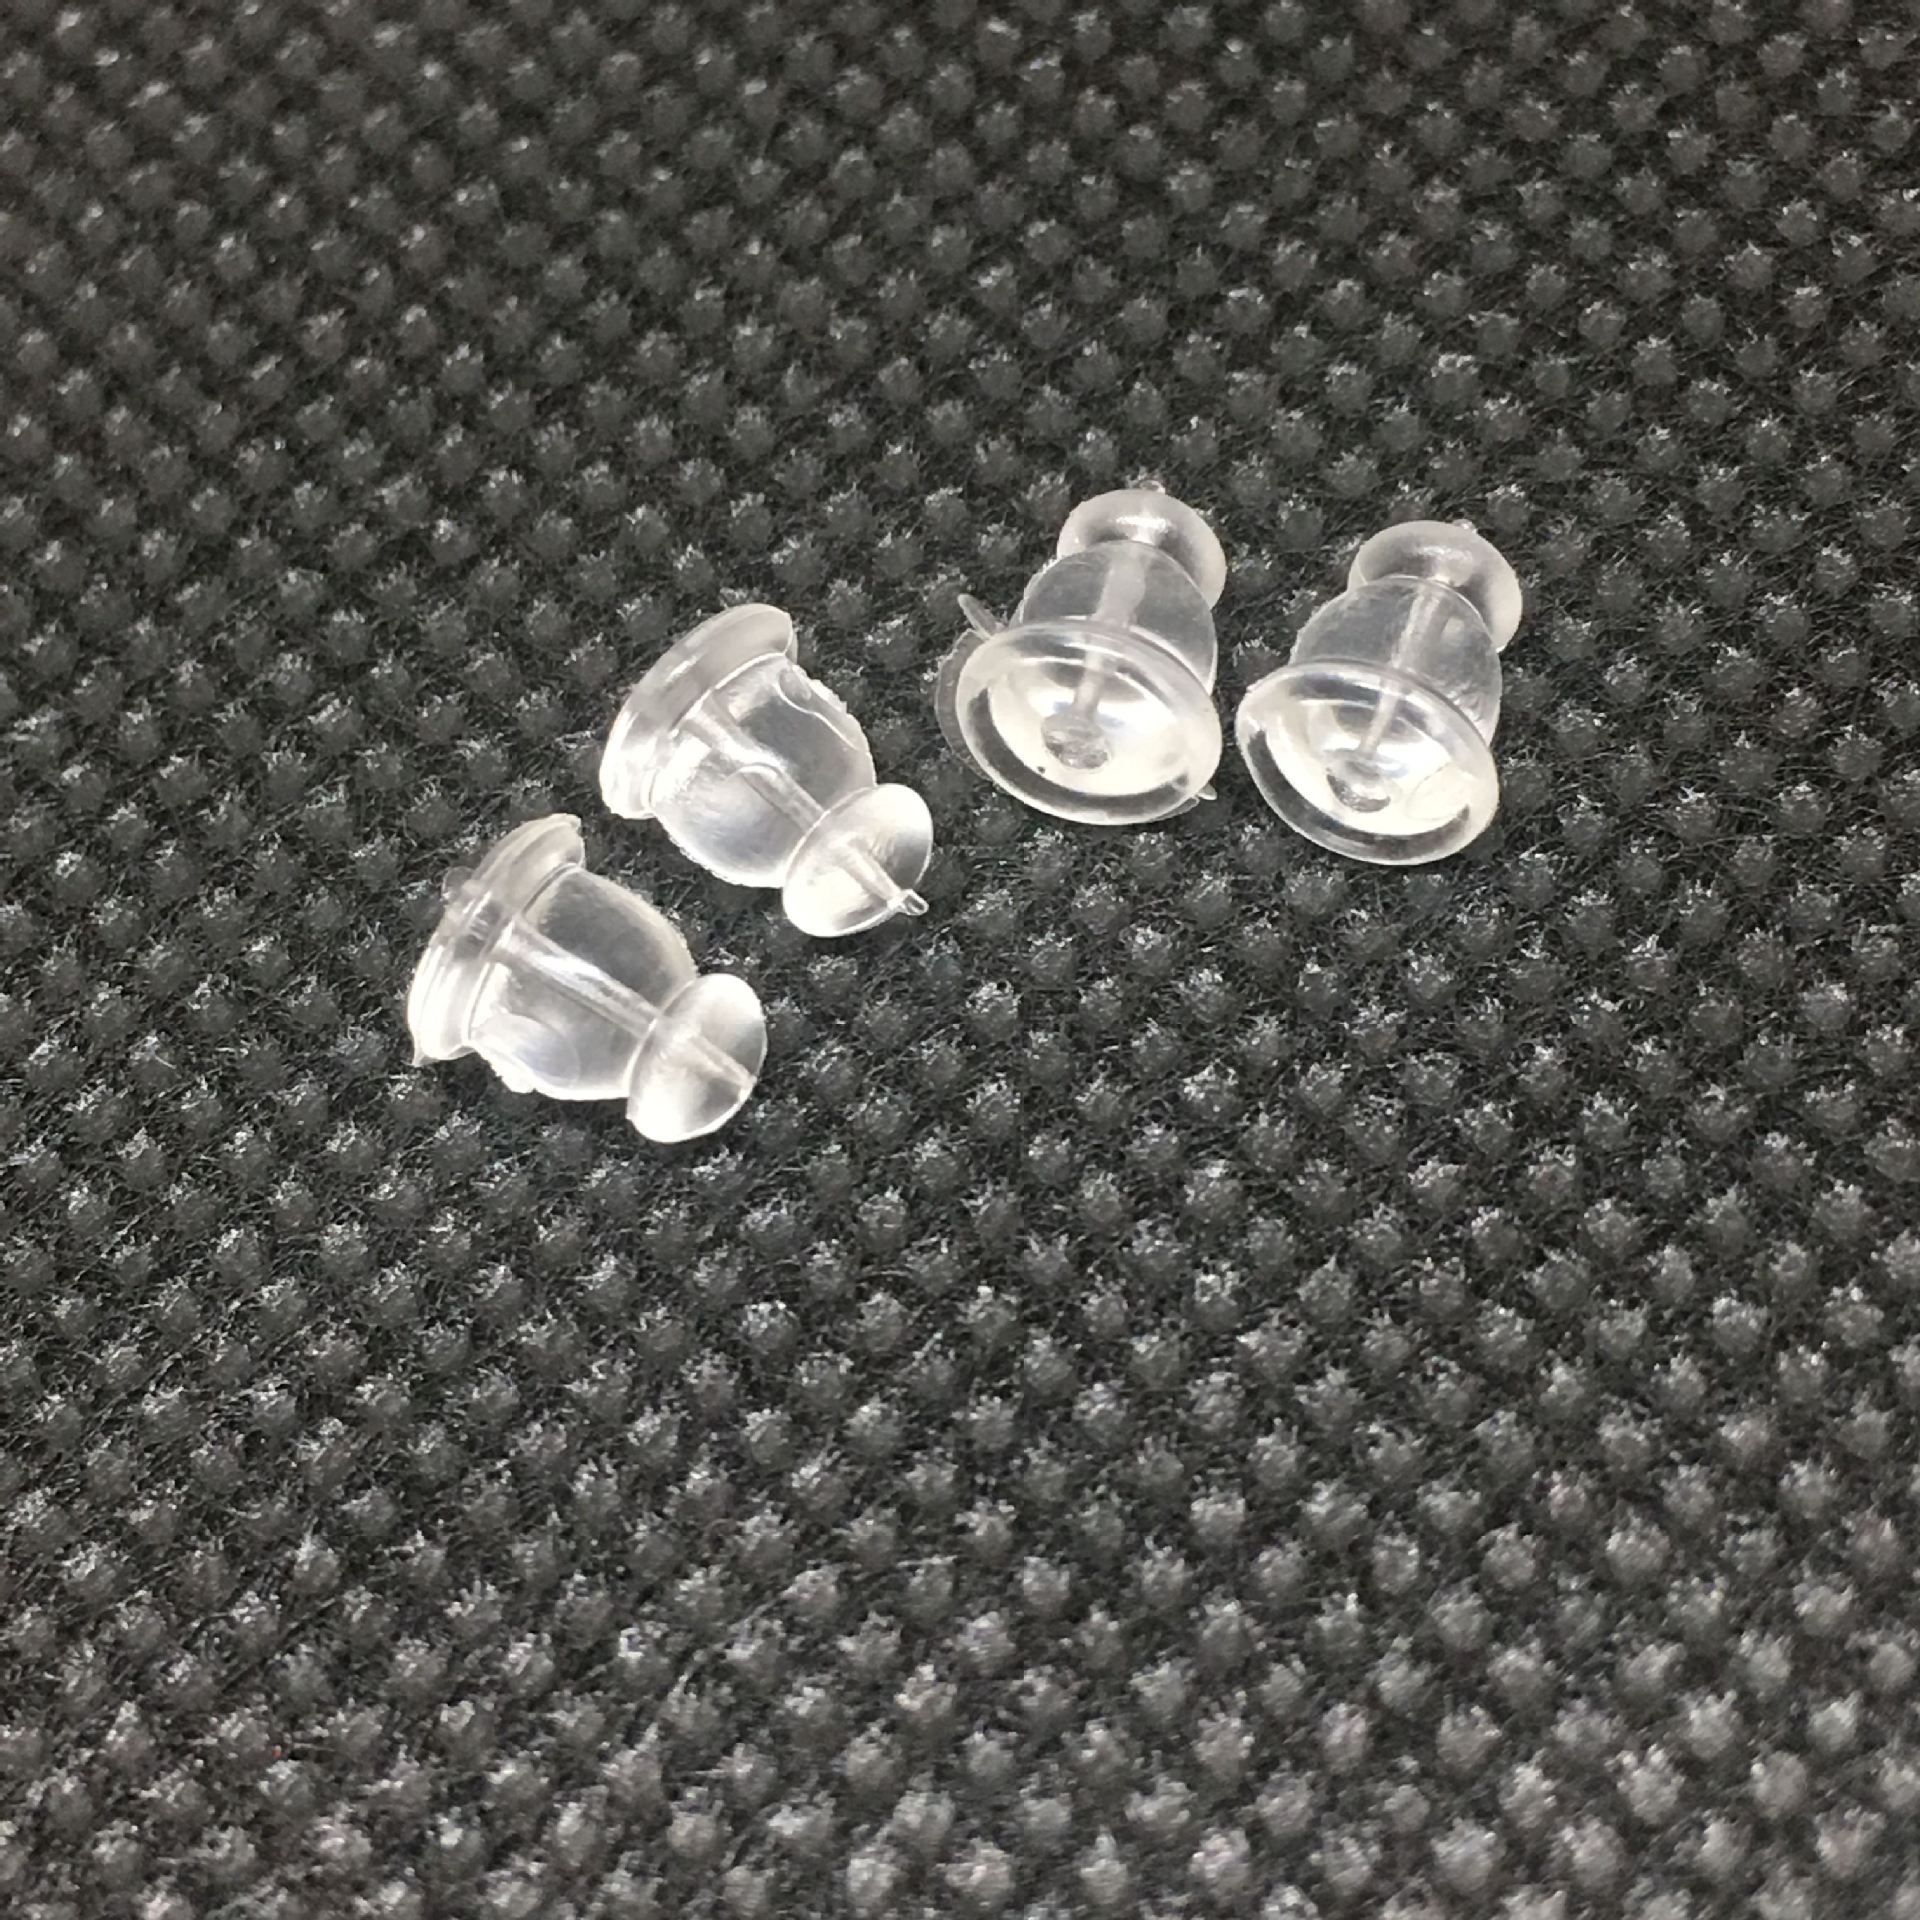 2:Cup shaped ear plugs